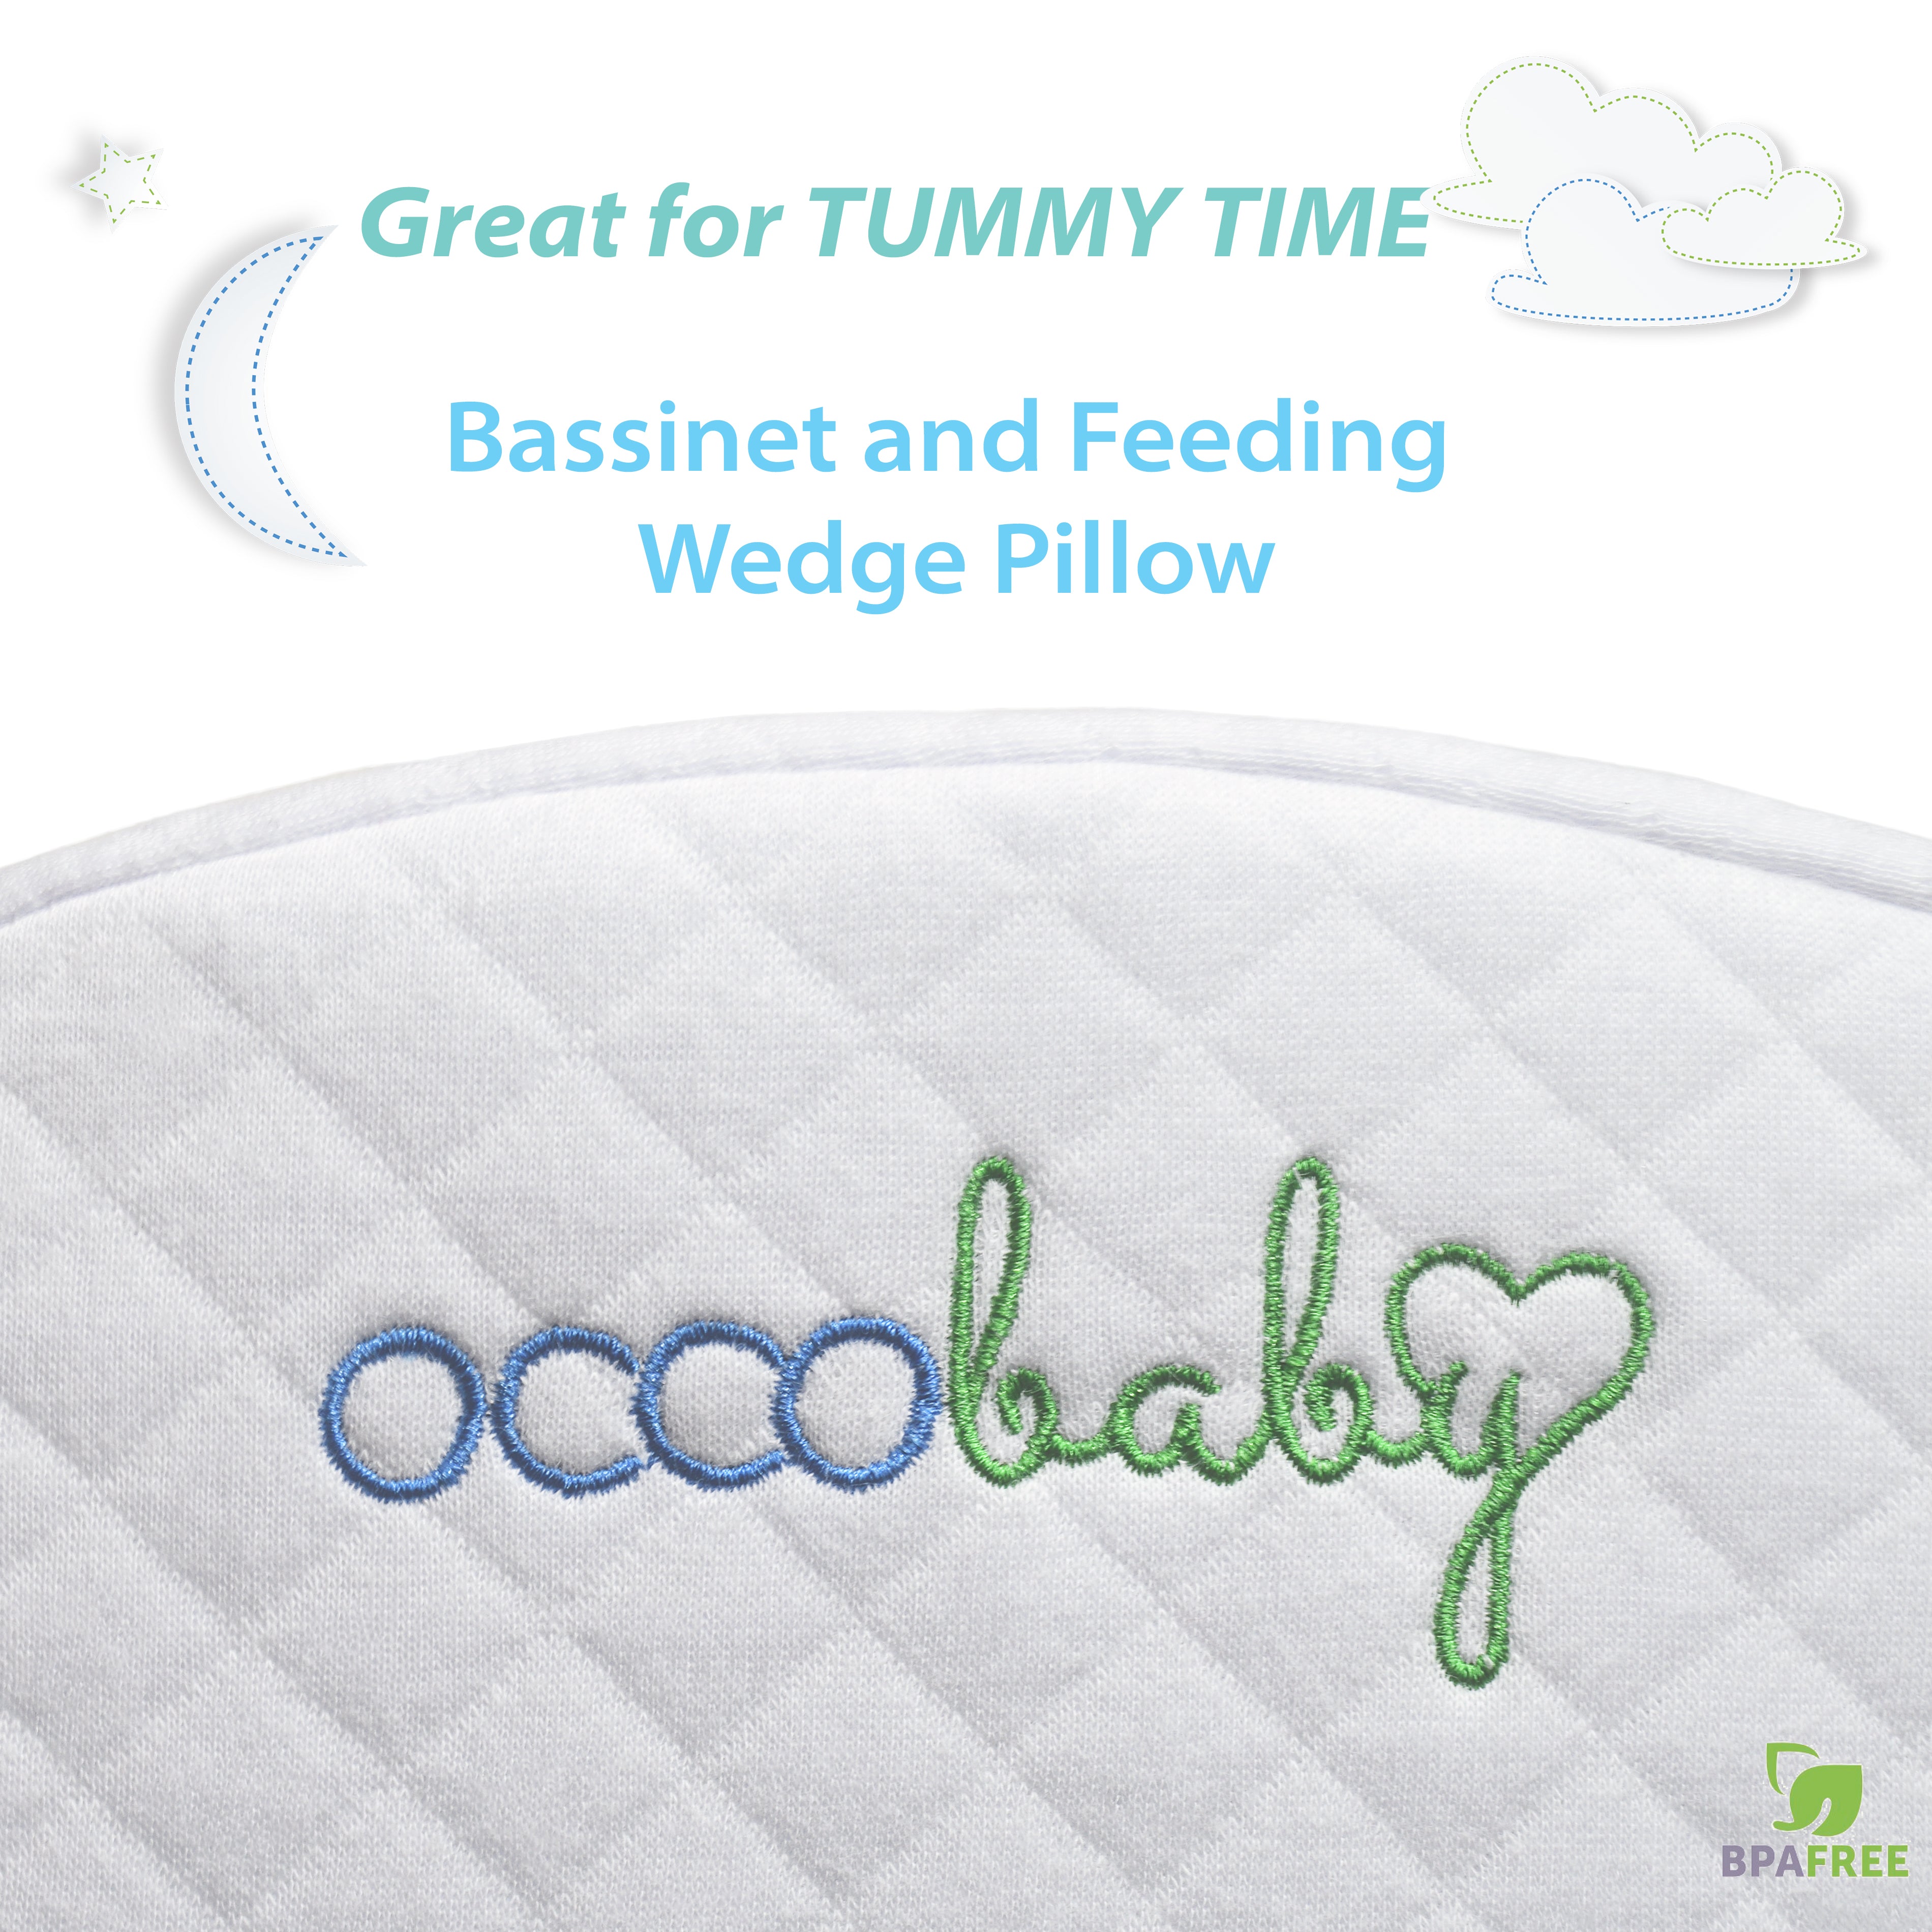 OCCObaby Pregnancy Pillow Wedge, pregnancy pillow